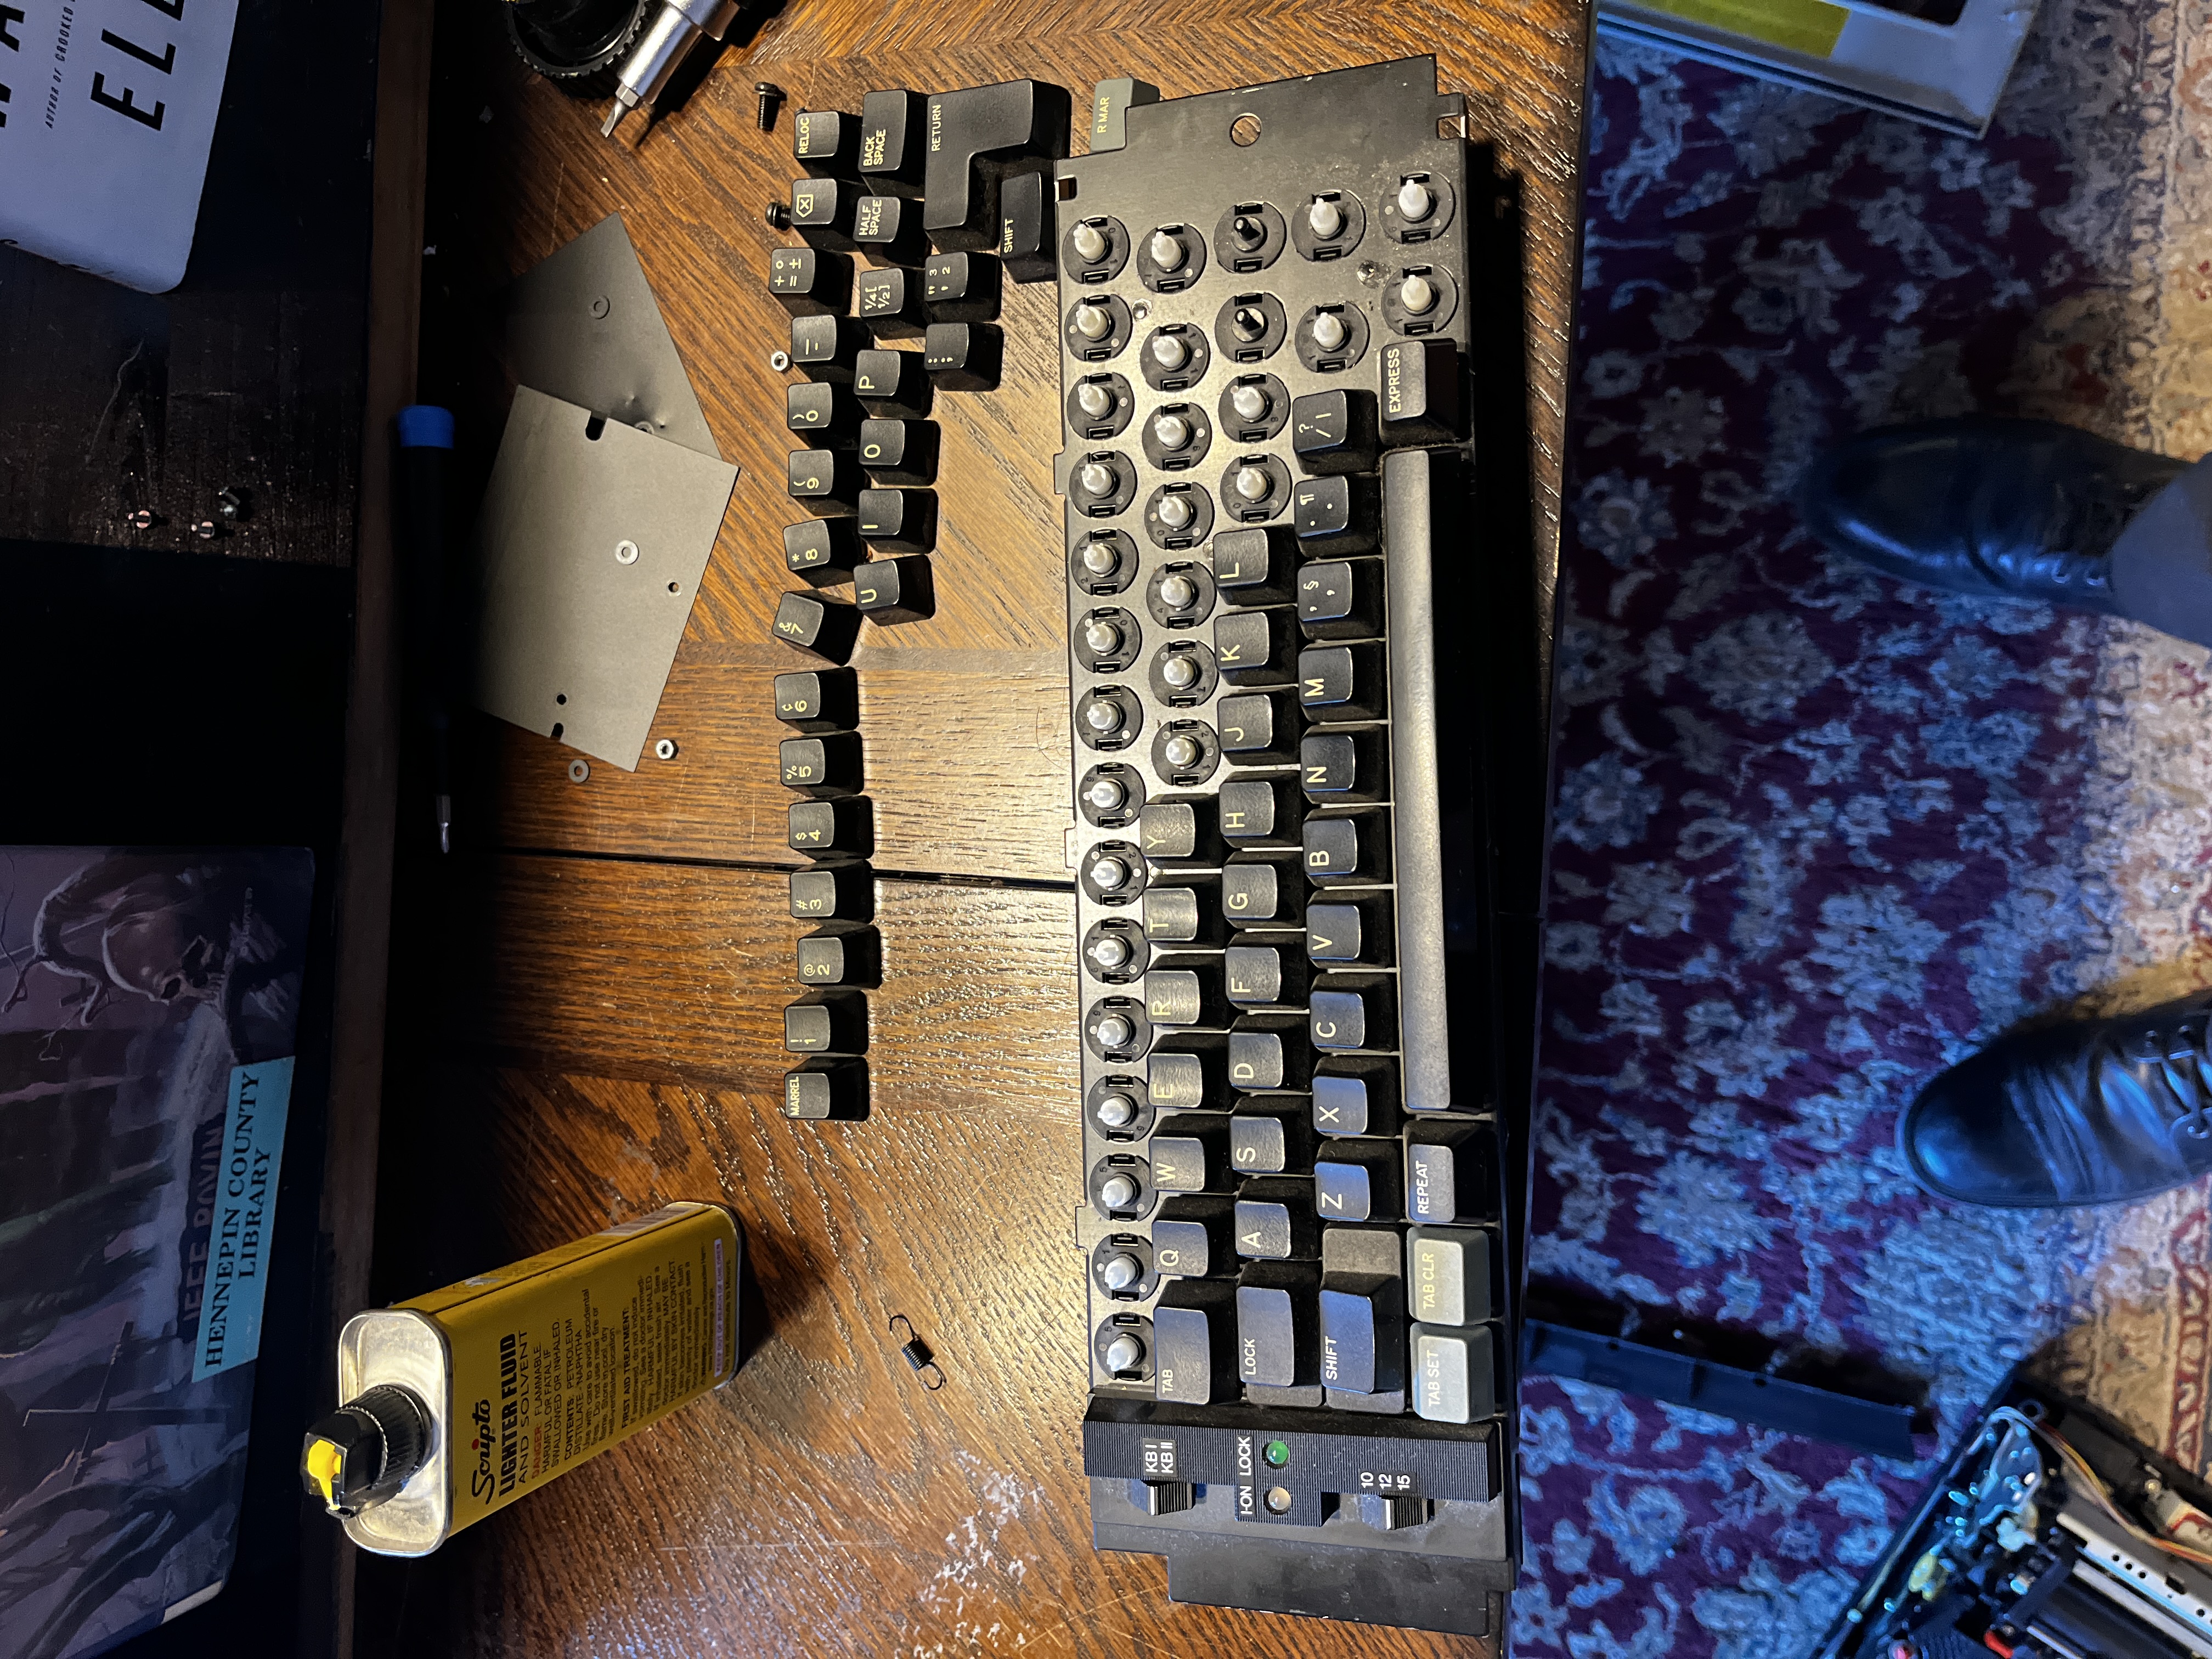 Keyboard removed (along with the rear control board). Some of the keycaps removed as well.